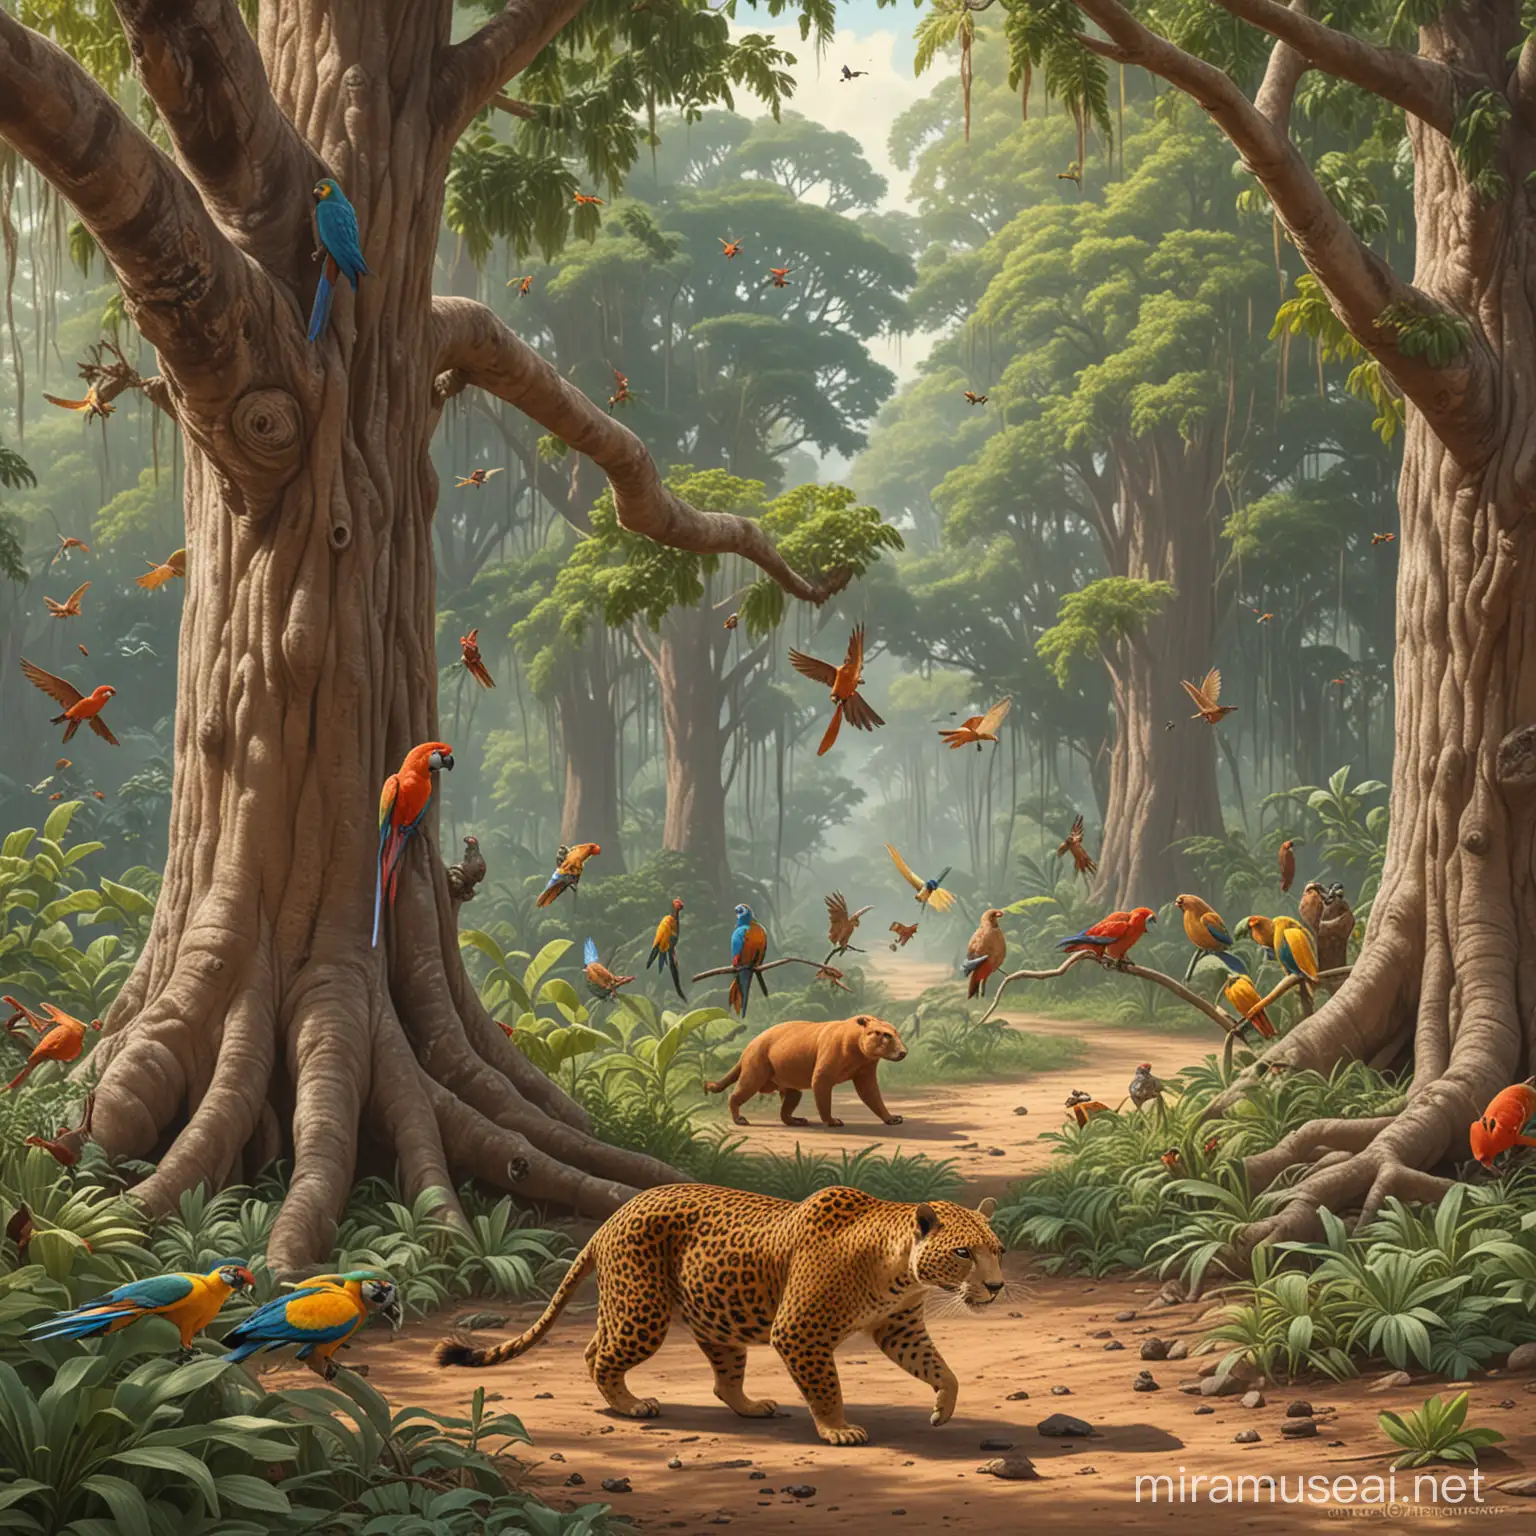 a jaguar walking alongside his friends - a colorful macaw, a playful capybara, a wise old tree, and a busy colony of ants.]